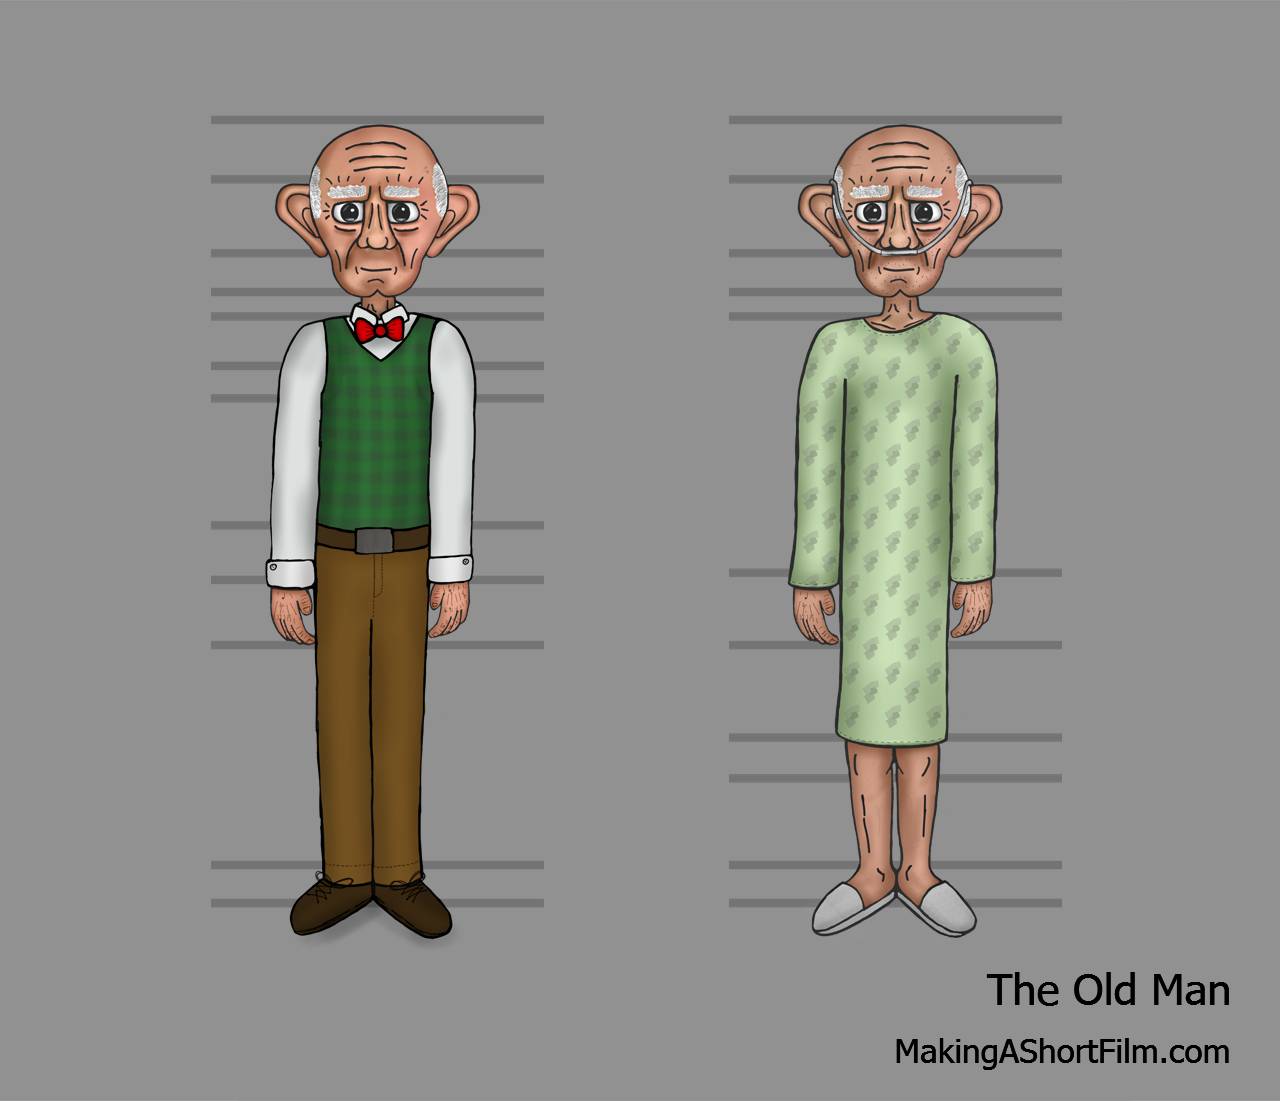 A comparison between the Old Man in the dream and in real life